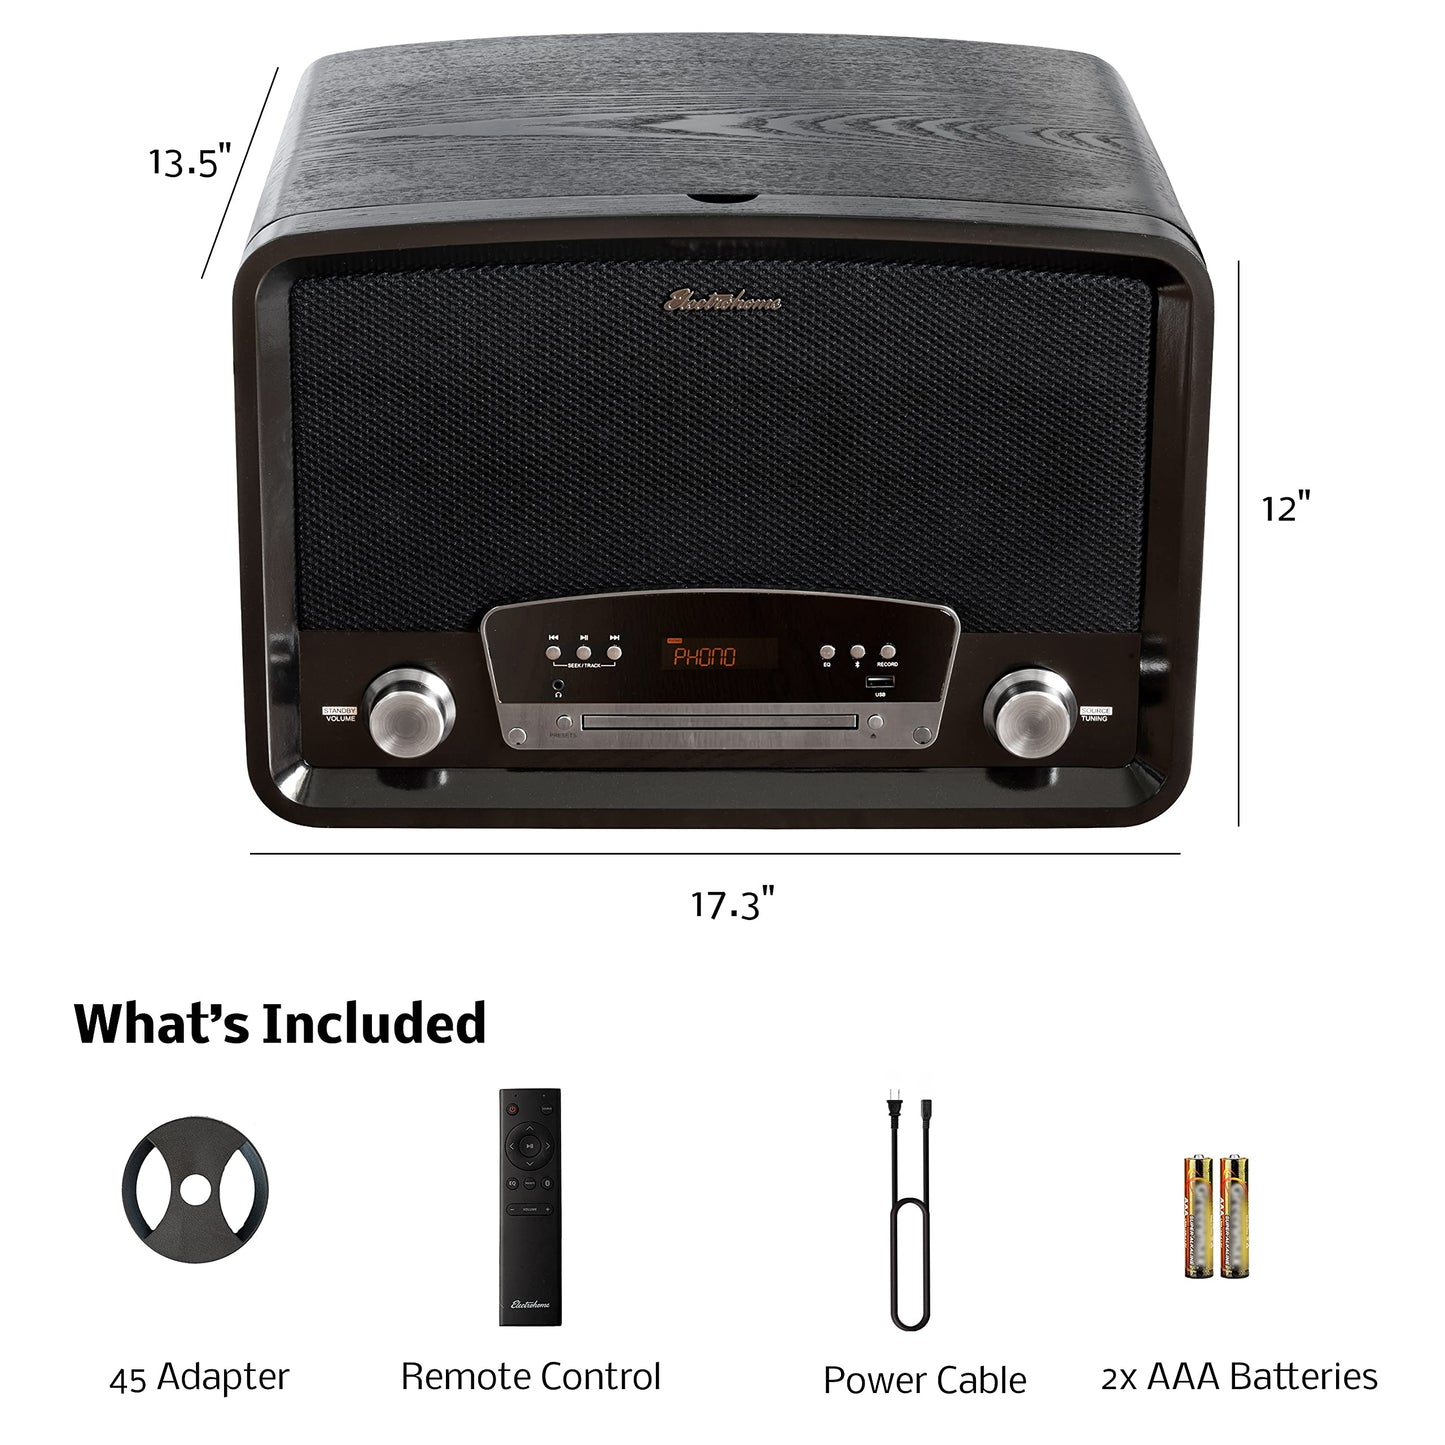 Electrohome Kingston 7-in-1 Vintage Vinyl Record Player Stereo System with 3-Speed Turntable, Bluetooth, AM/FM Radio, CD, Aux in, RCA/Headphone Out, Vinyl/CD to MP3 Recording & USB Playback (RR75B)